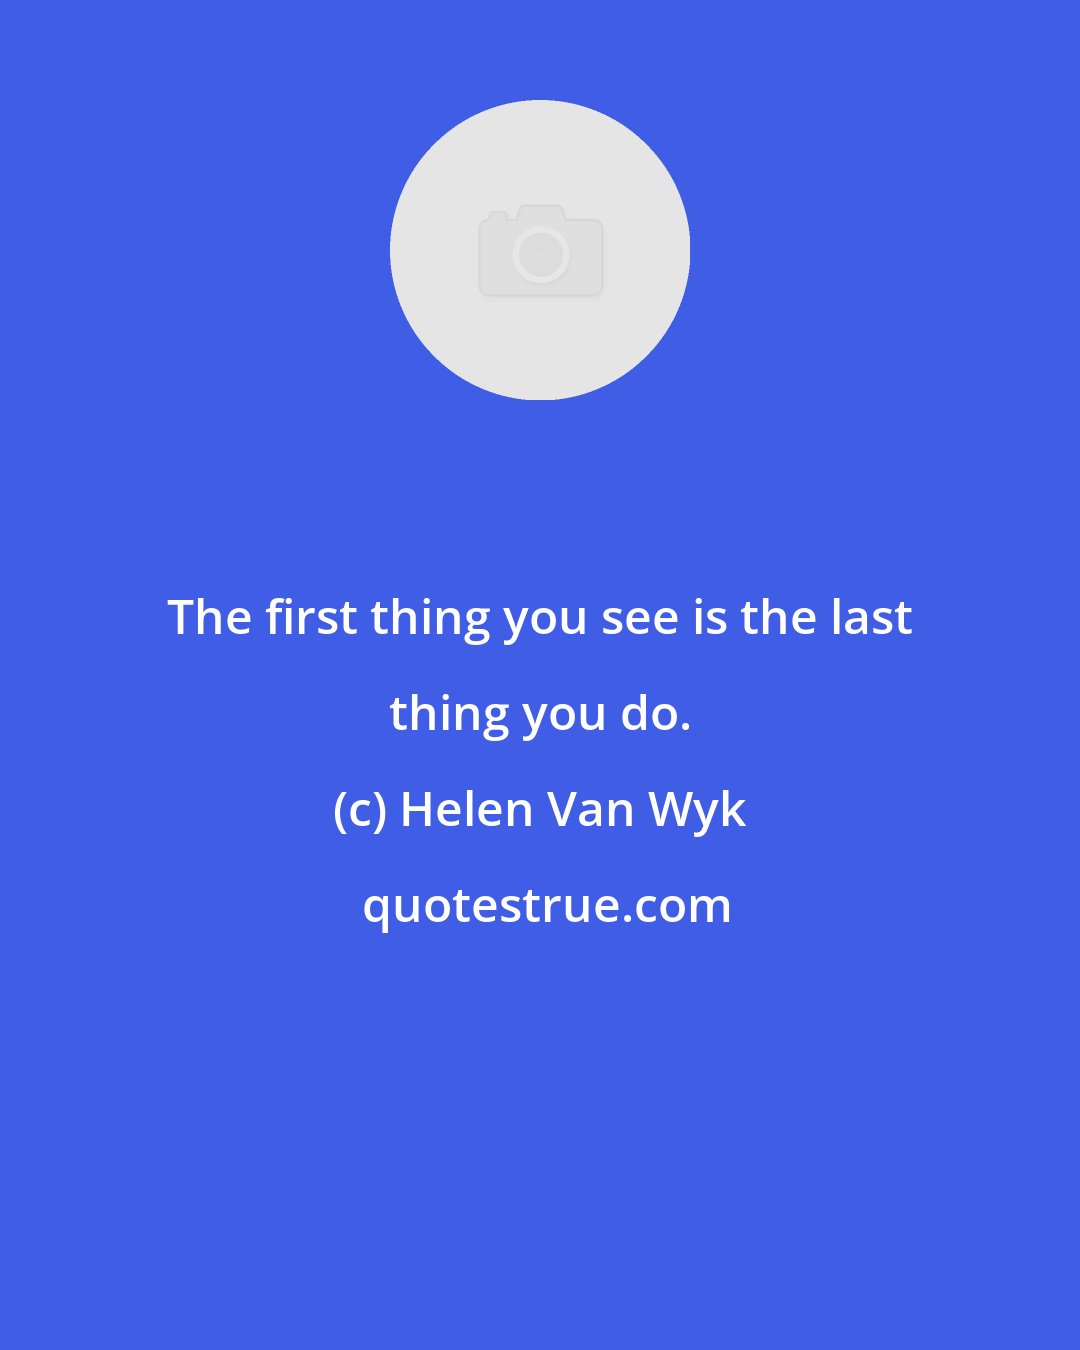 Helen Van Wyk: The first thing you see is the last thing you do.